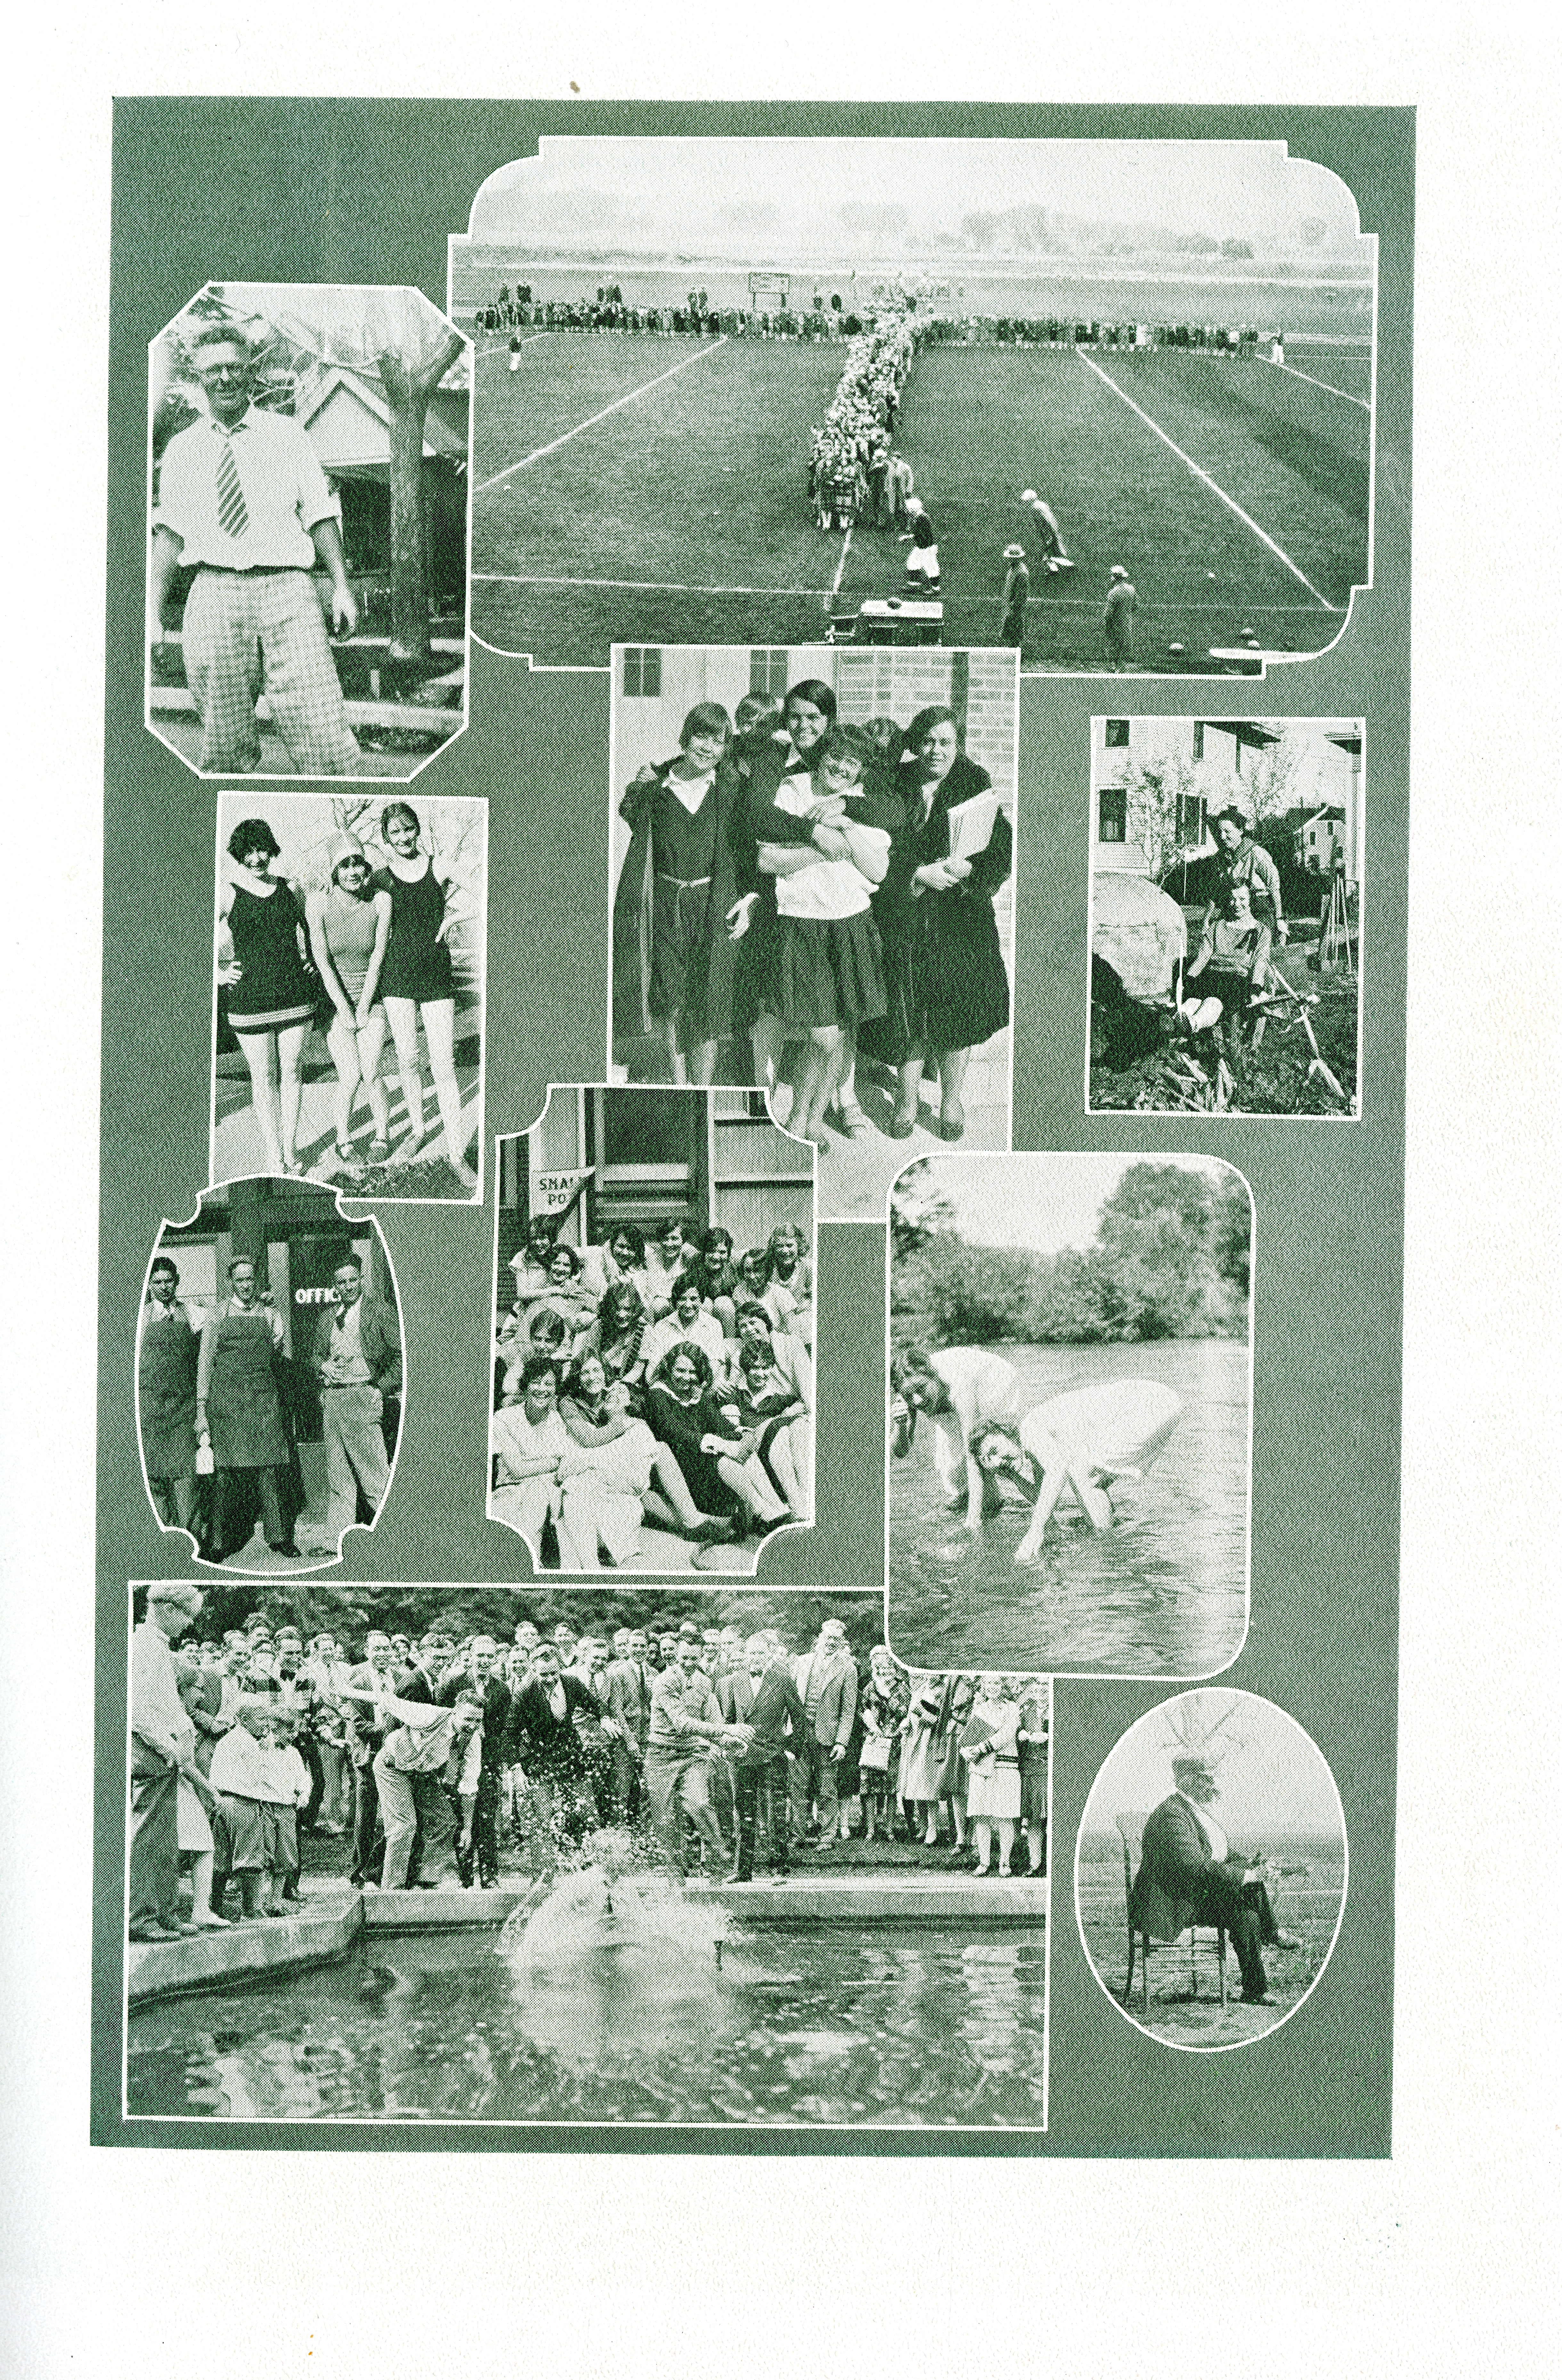 A collage of Homecoming activity from the 1920's